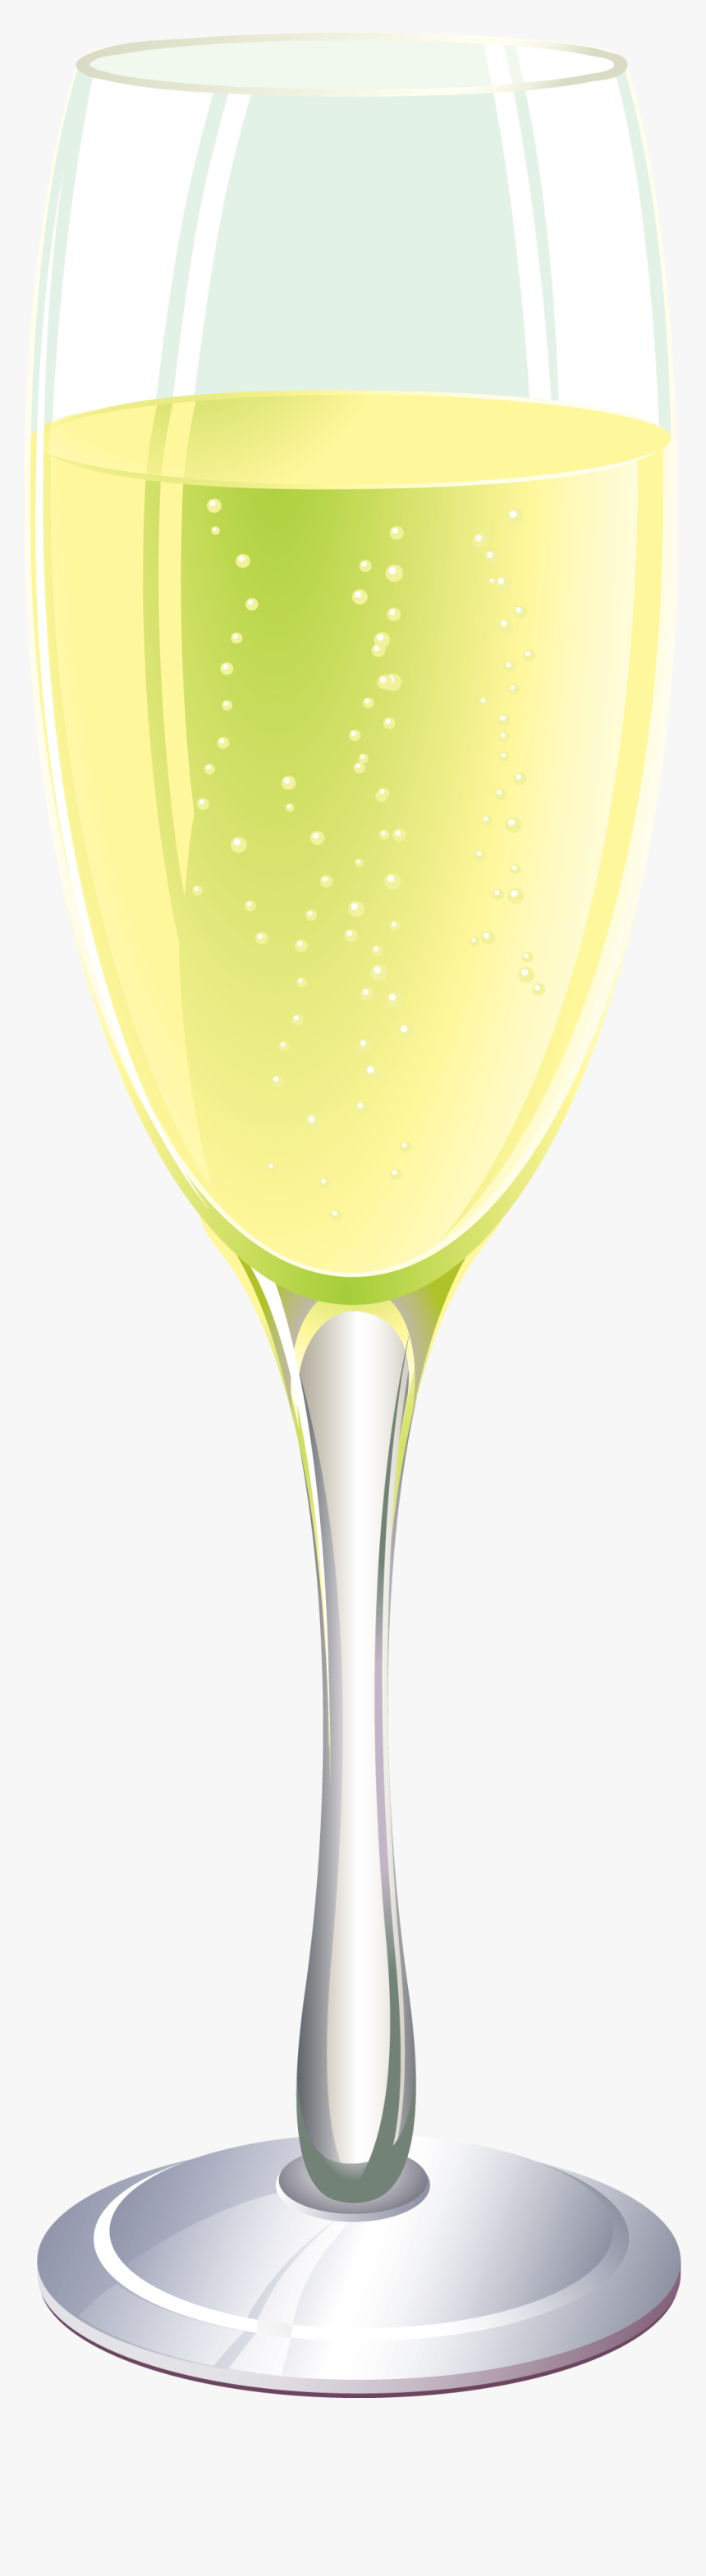 Glass Png Image - Wine Glass, Transparent Png, Free Download